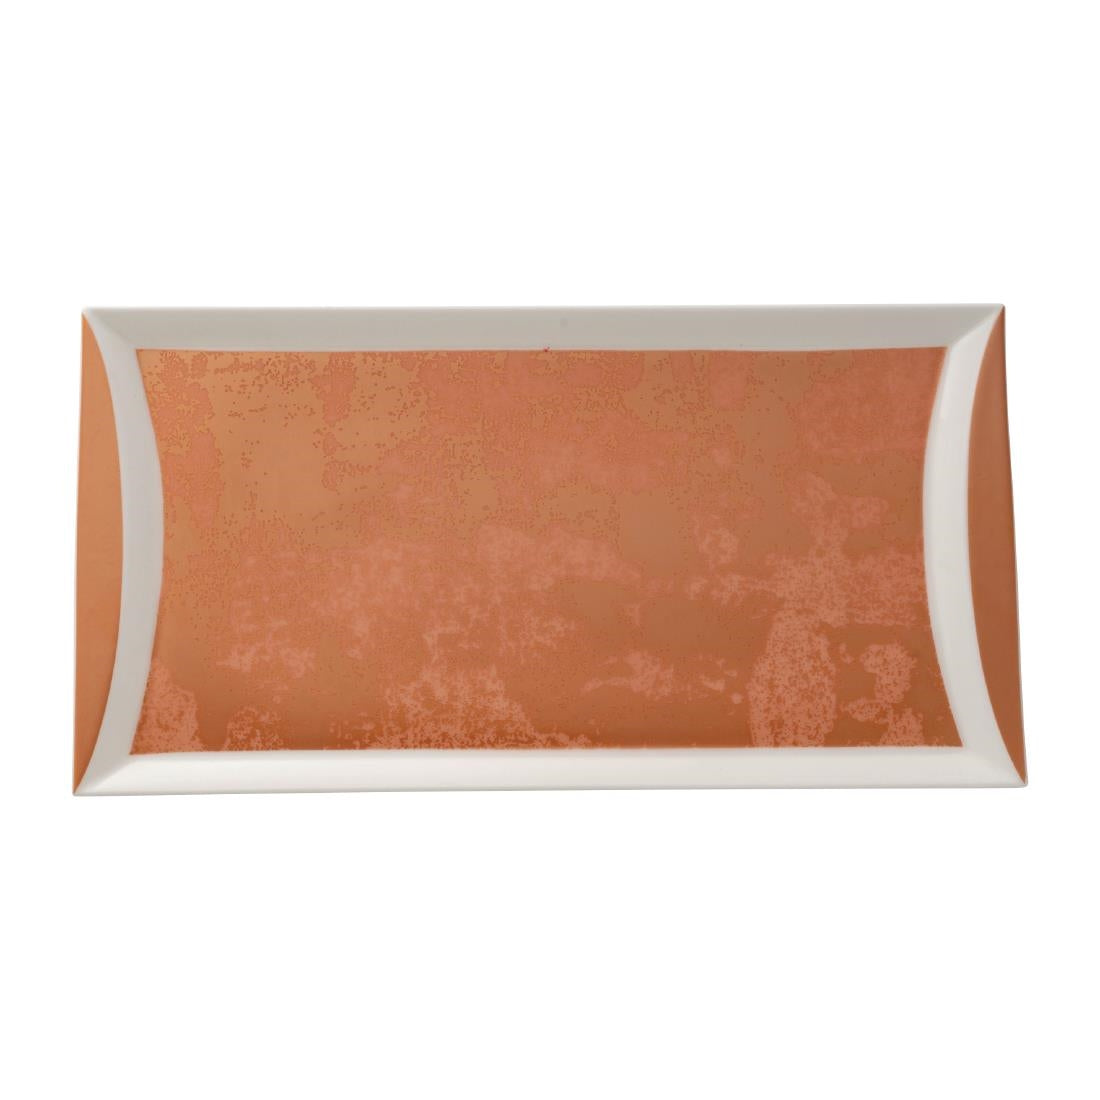 FE111 Royal Crown Derby Crushed Velvet Copper Rectangle Tray 320x160mm (Pack of 6) JD Catering Equipment Solutions Ltd